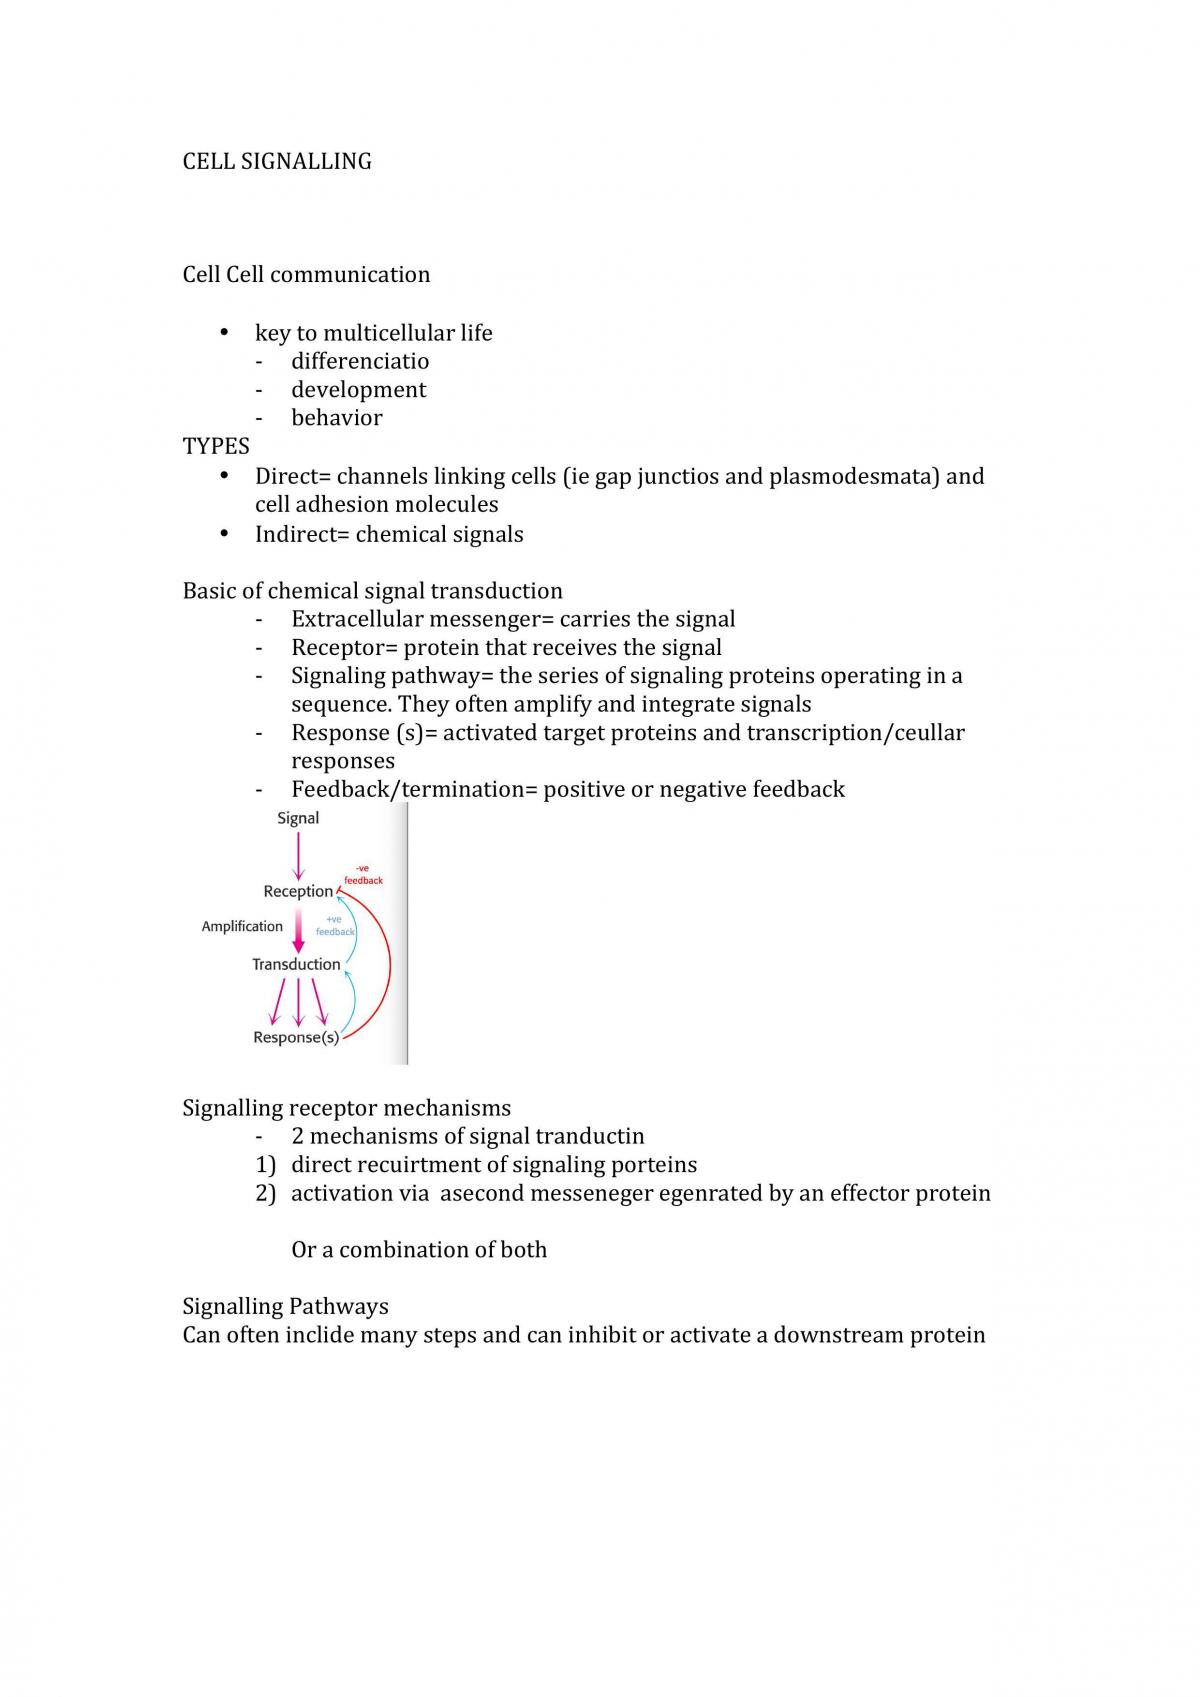 Cell Signalling Summary - Page 1